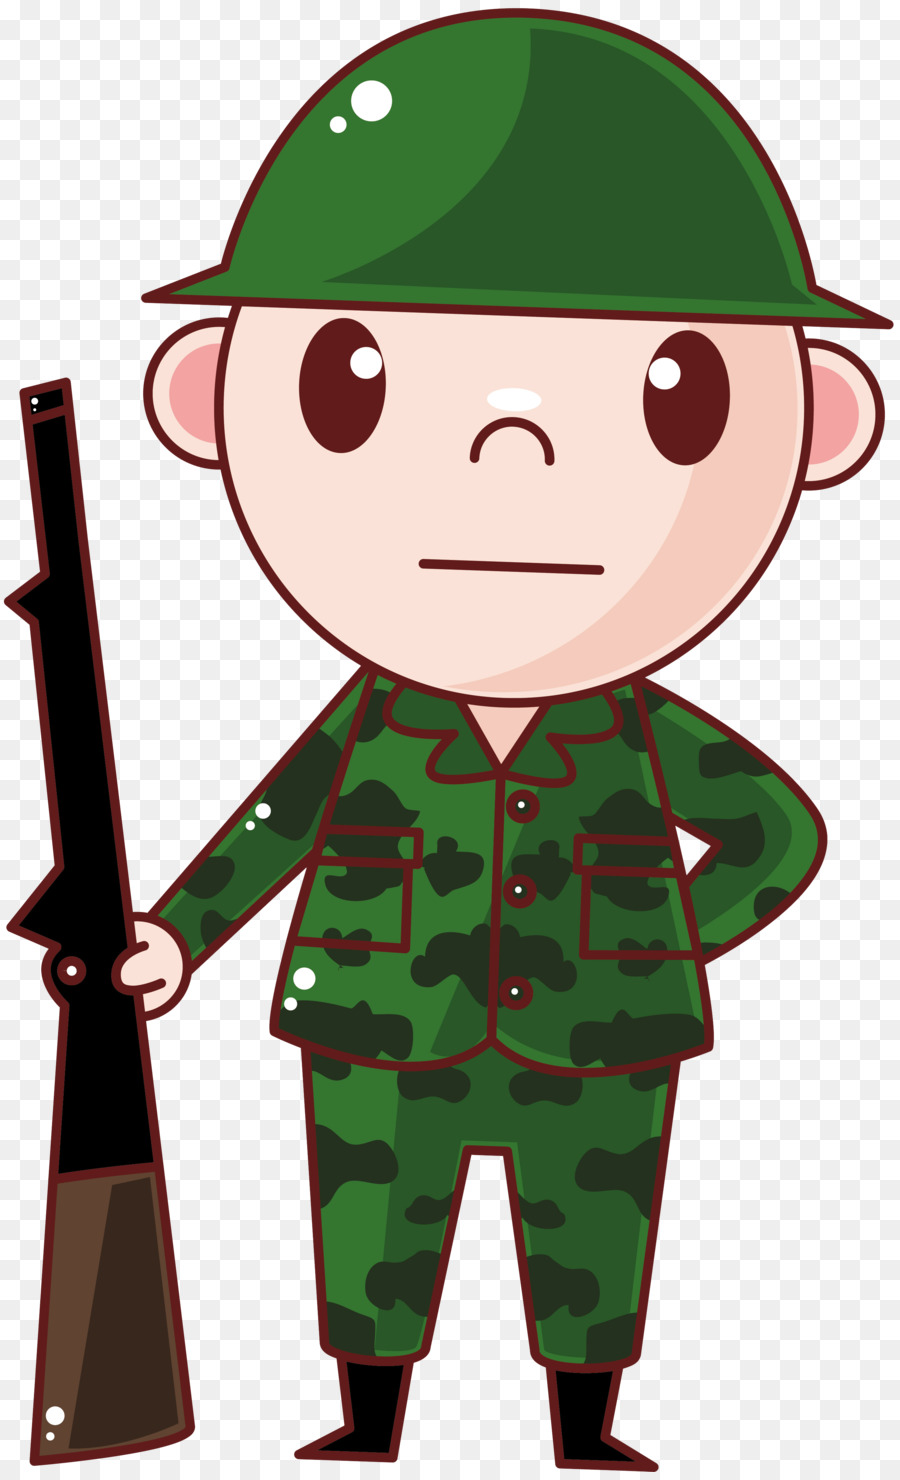 Soldiers clipart cartoon, Soldiers cartoon Transparent FREE for